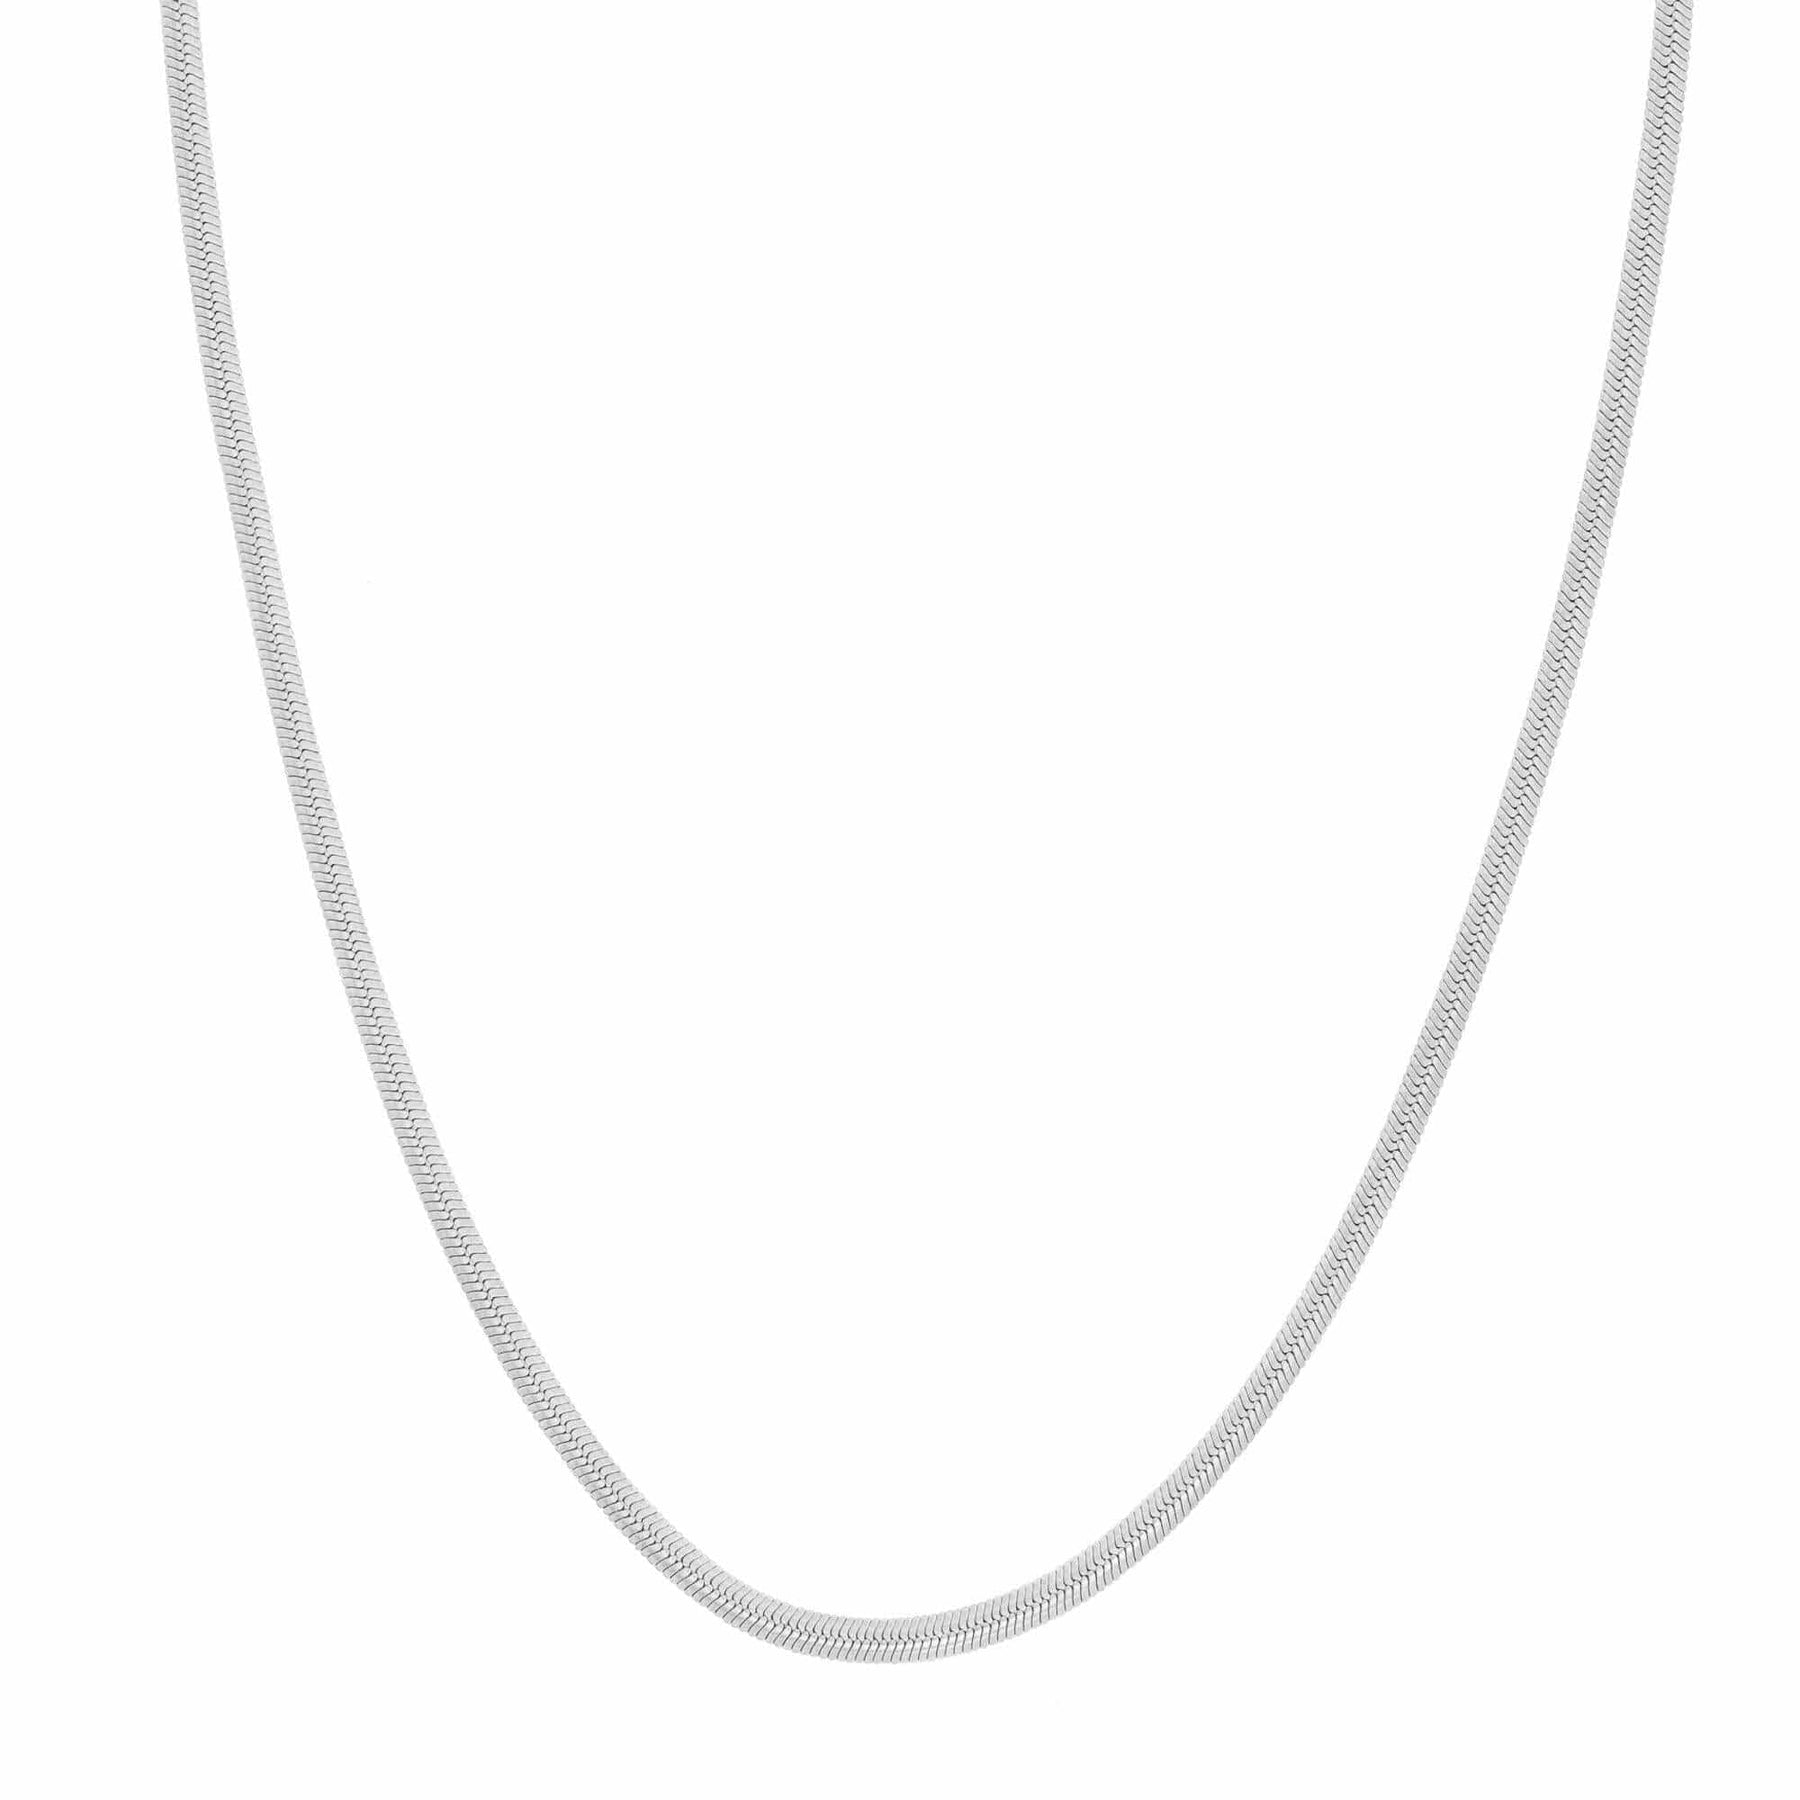 BohoMoon Stainless Steel Emilia Choker / Necklace Silver / Necklace